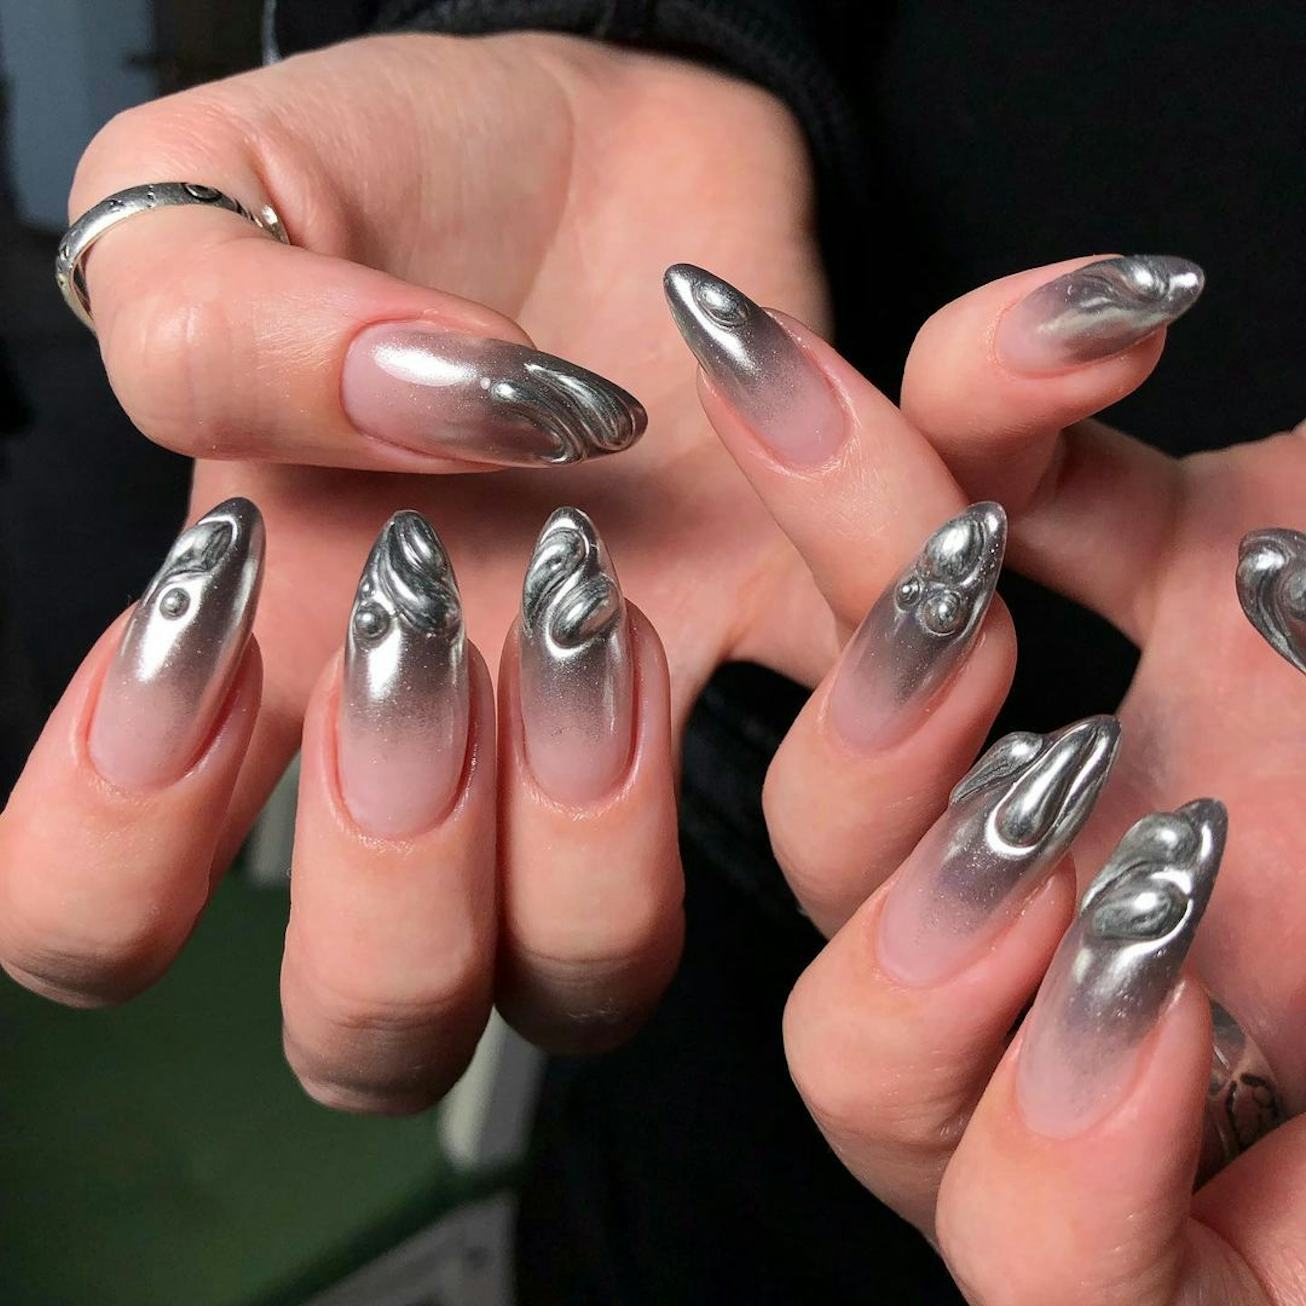 3D metallic manicure inspired by the horoscope sign of Scorpio.